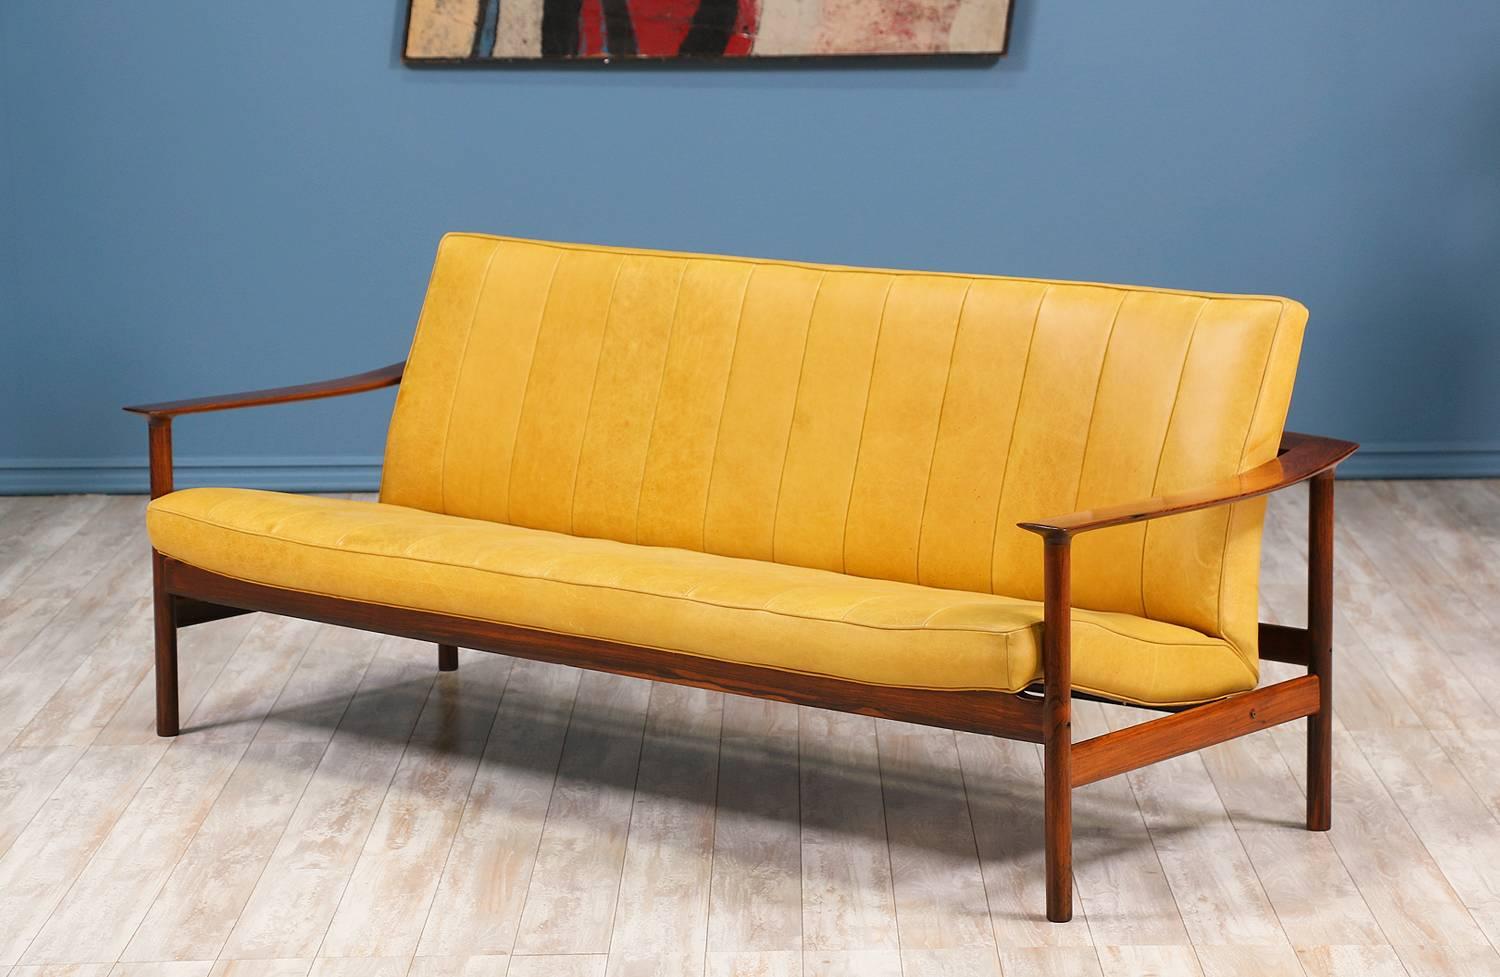 Norwegian modern sofa designed by Torbjørn Afdal for Svein Bjørneng circa 1960’s. With a vibrant mustard yellow leather seat founded on a newly refinished Brazilian rosewood frame, this expertly crafted design has been reupholstered with new